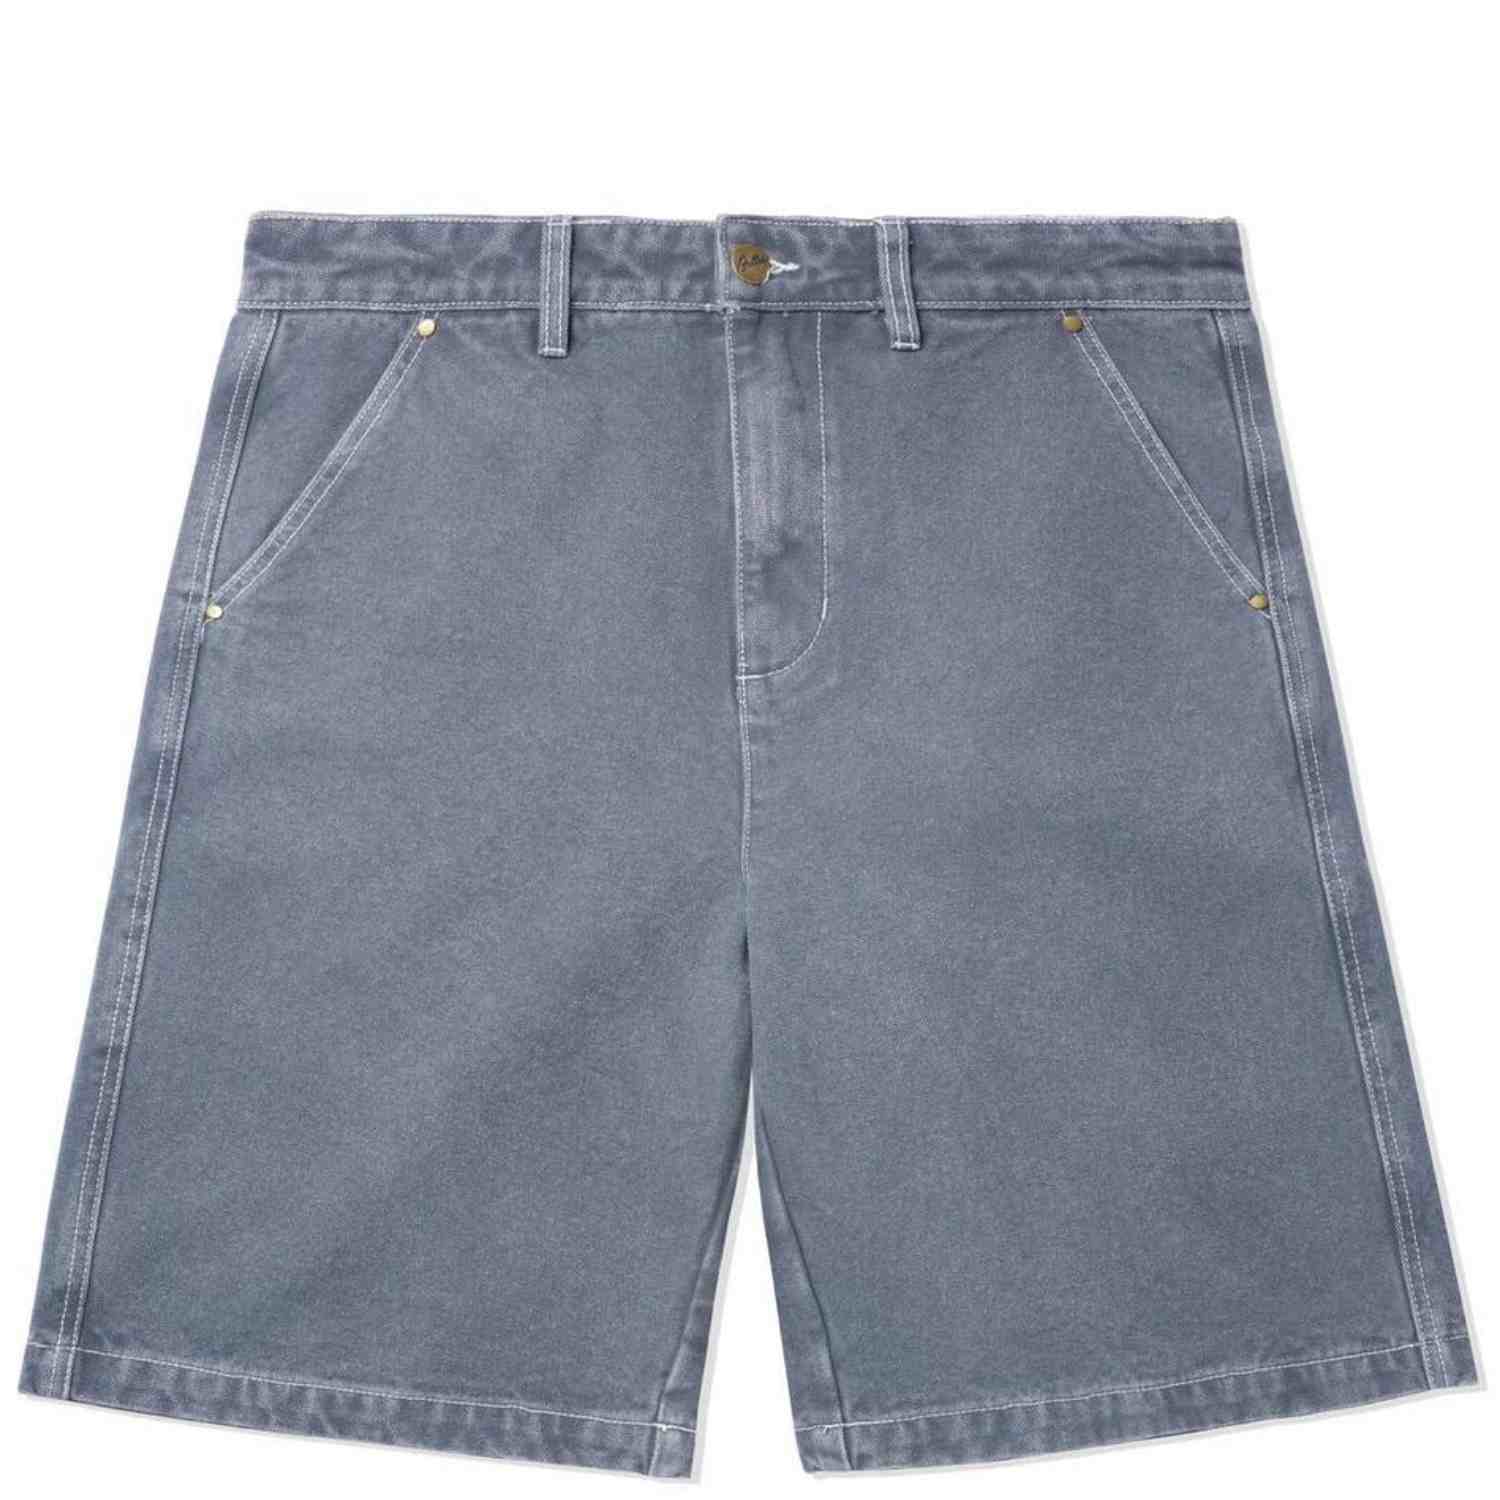 Butter Goods Washed Canvas Work Shorts - Slate